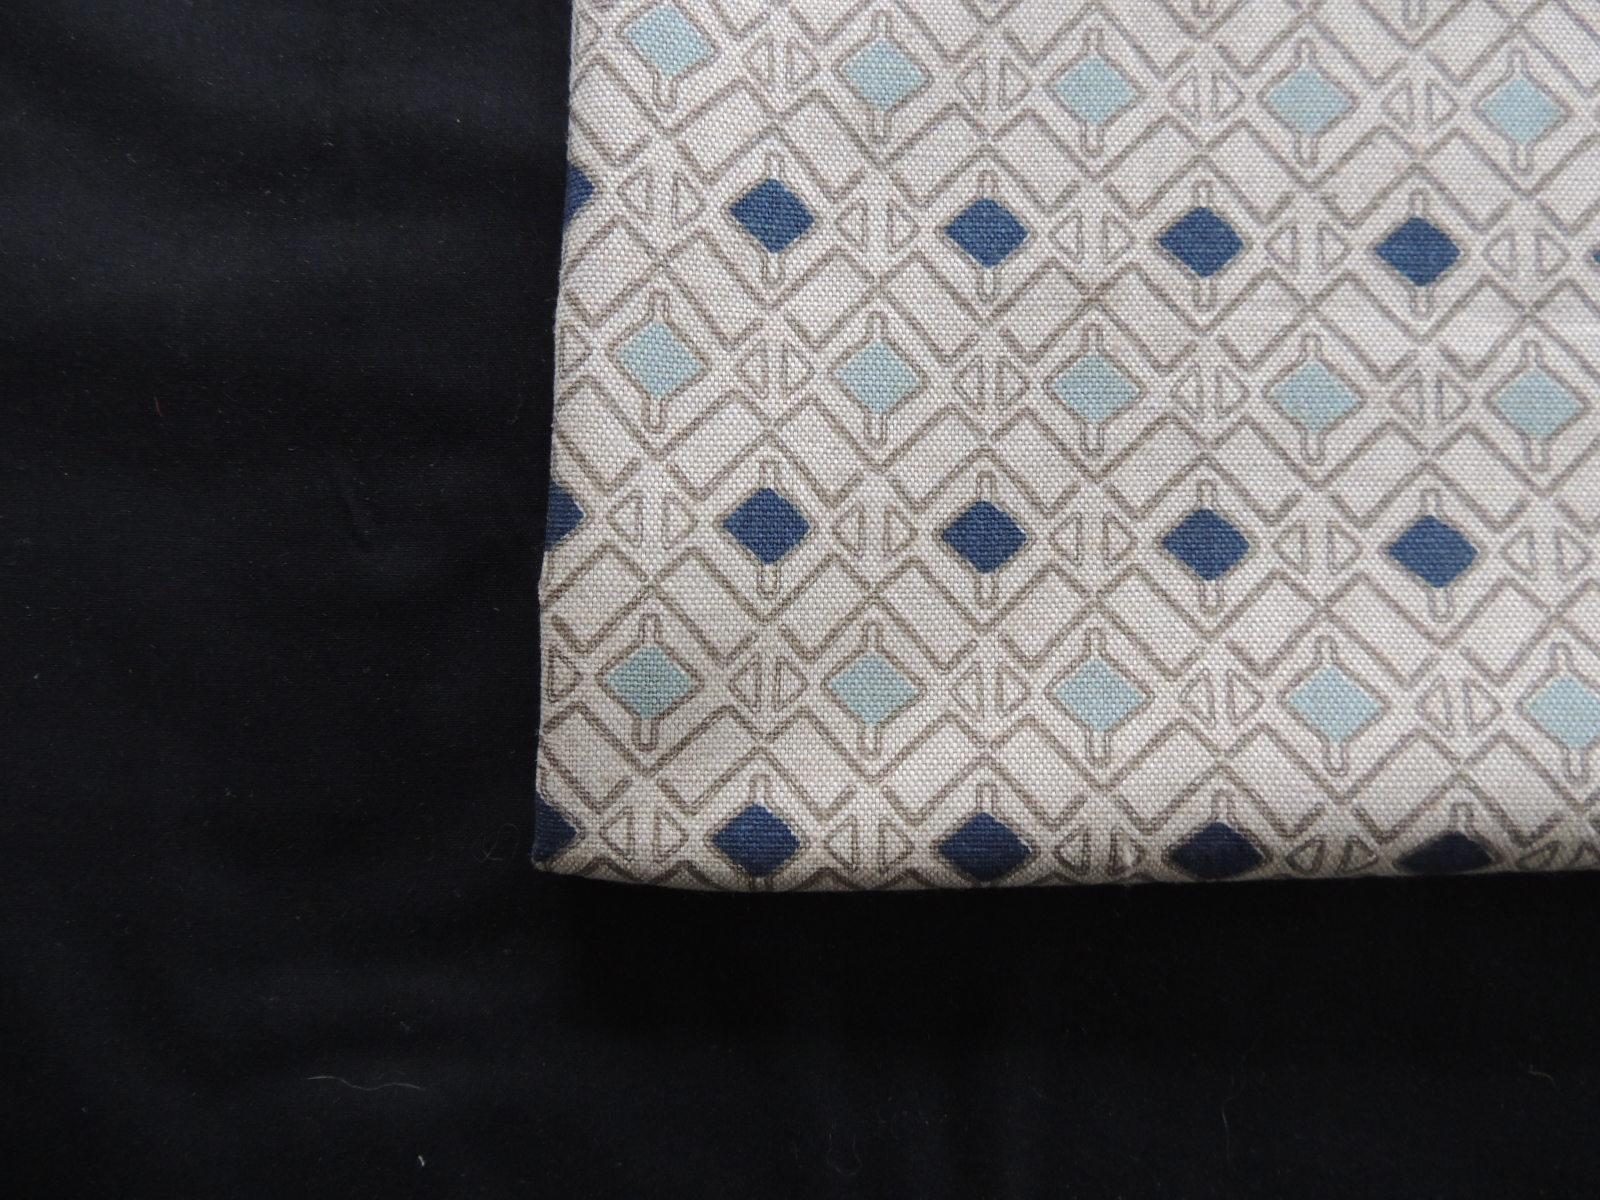 Aqua and green diamond pattern fabric fragment.
Printed linen fabric.
Sold as is.
Ideal for pillows or upholstery.
Size: 28